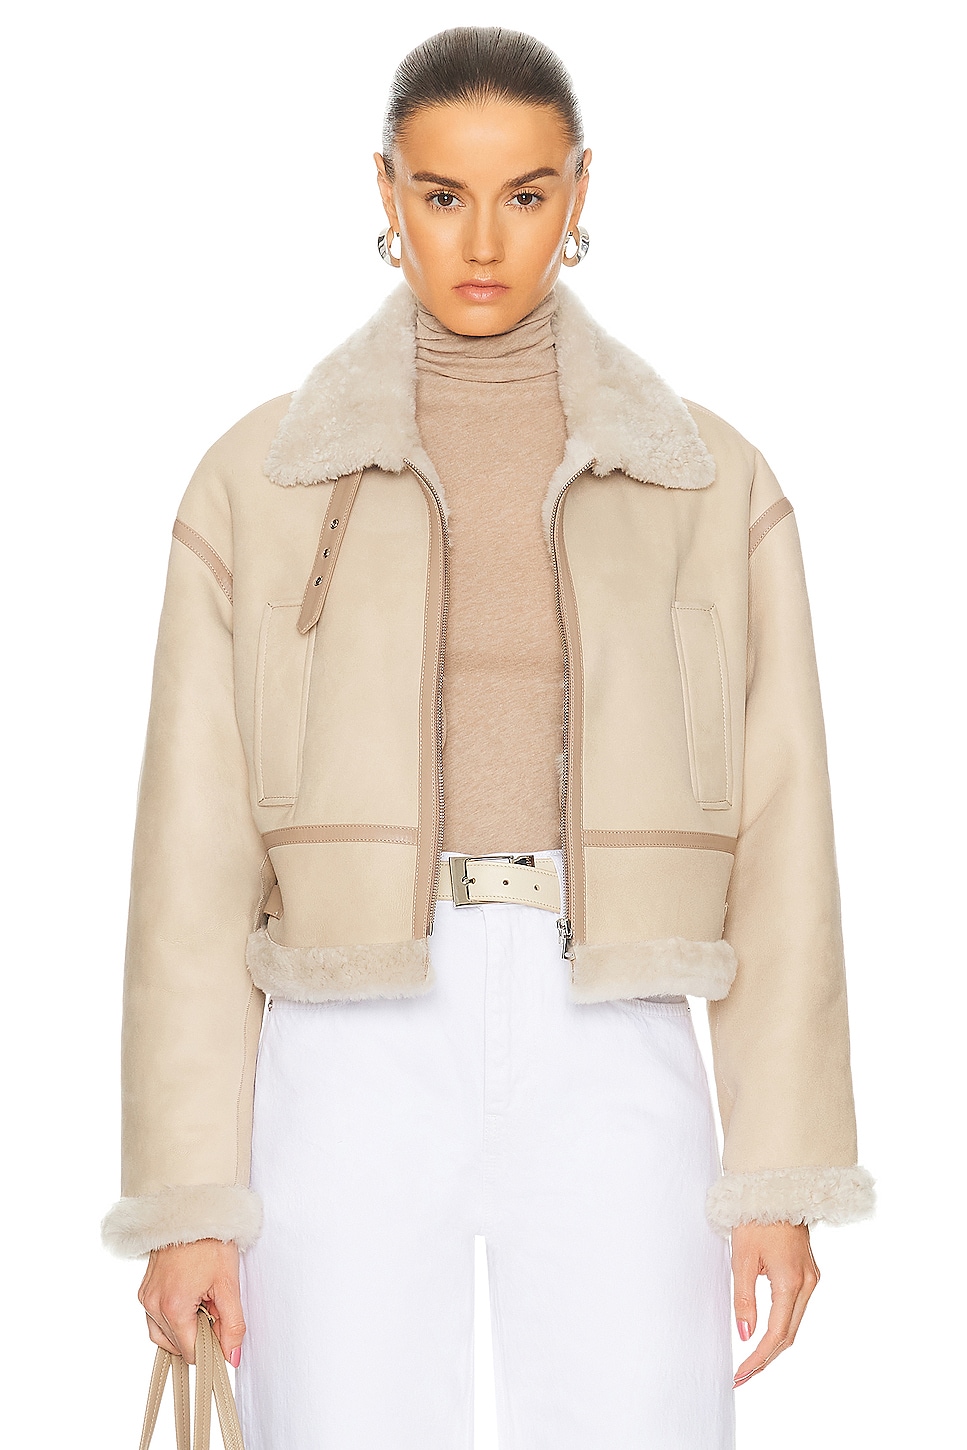 Image 1 of NOUR HAMMOUR Marco Jacket in Cream & Ivory